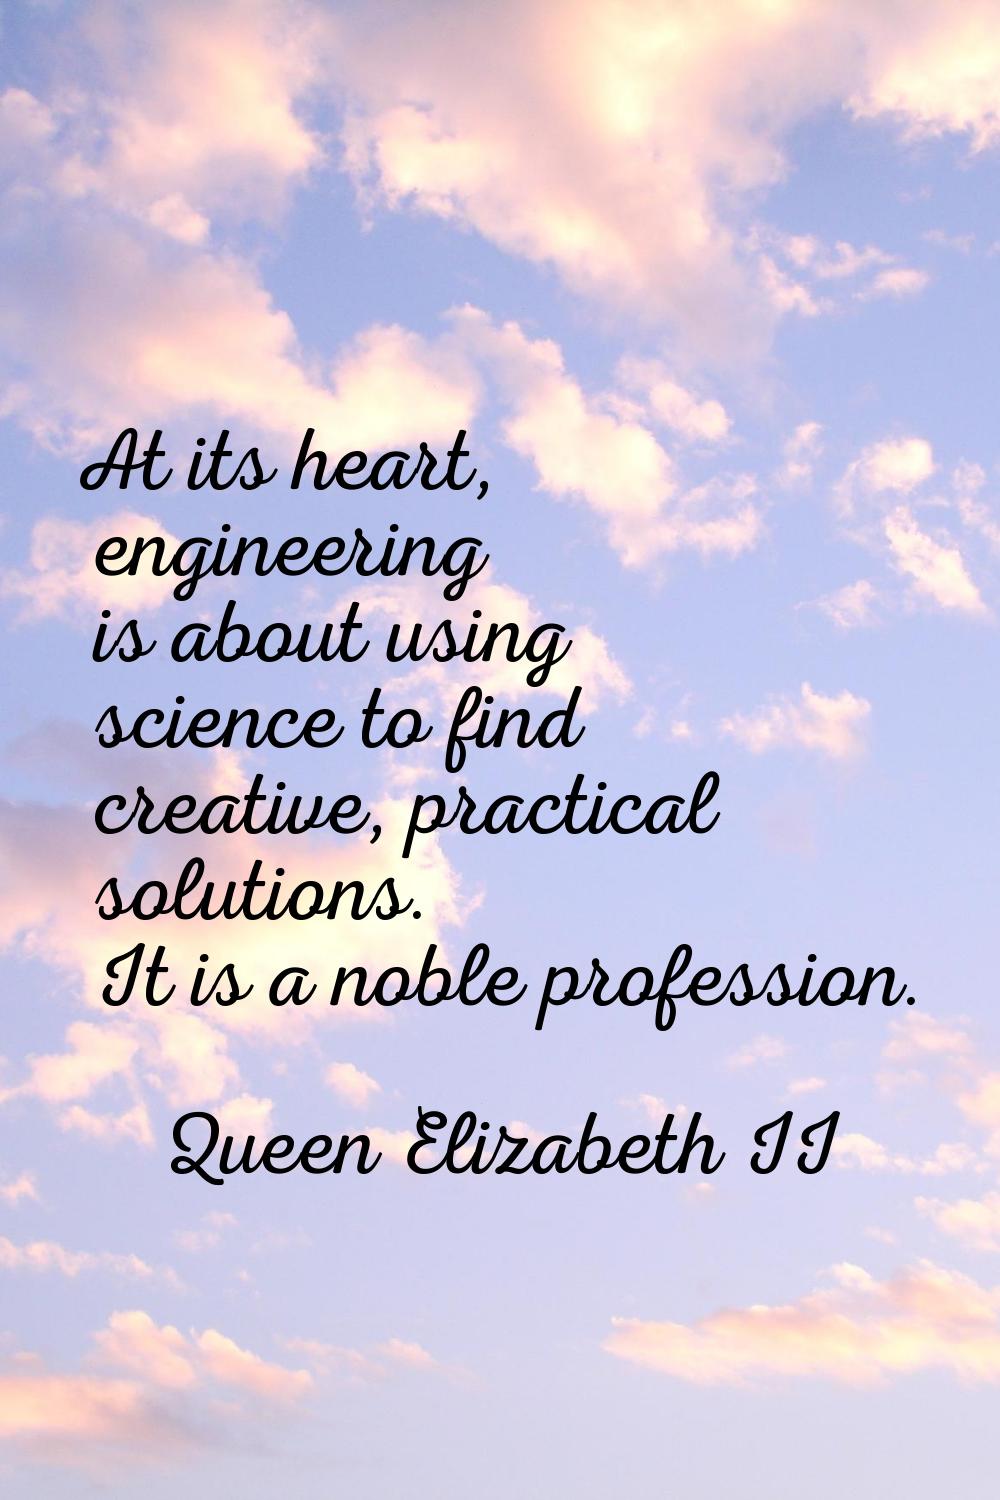 At its heart, engineering is about using science to find creative, practical solutions. It is a nob